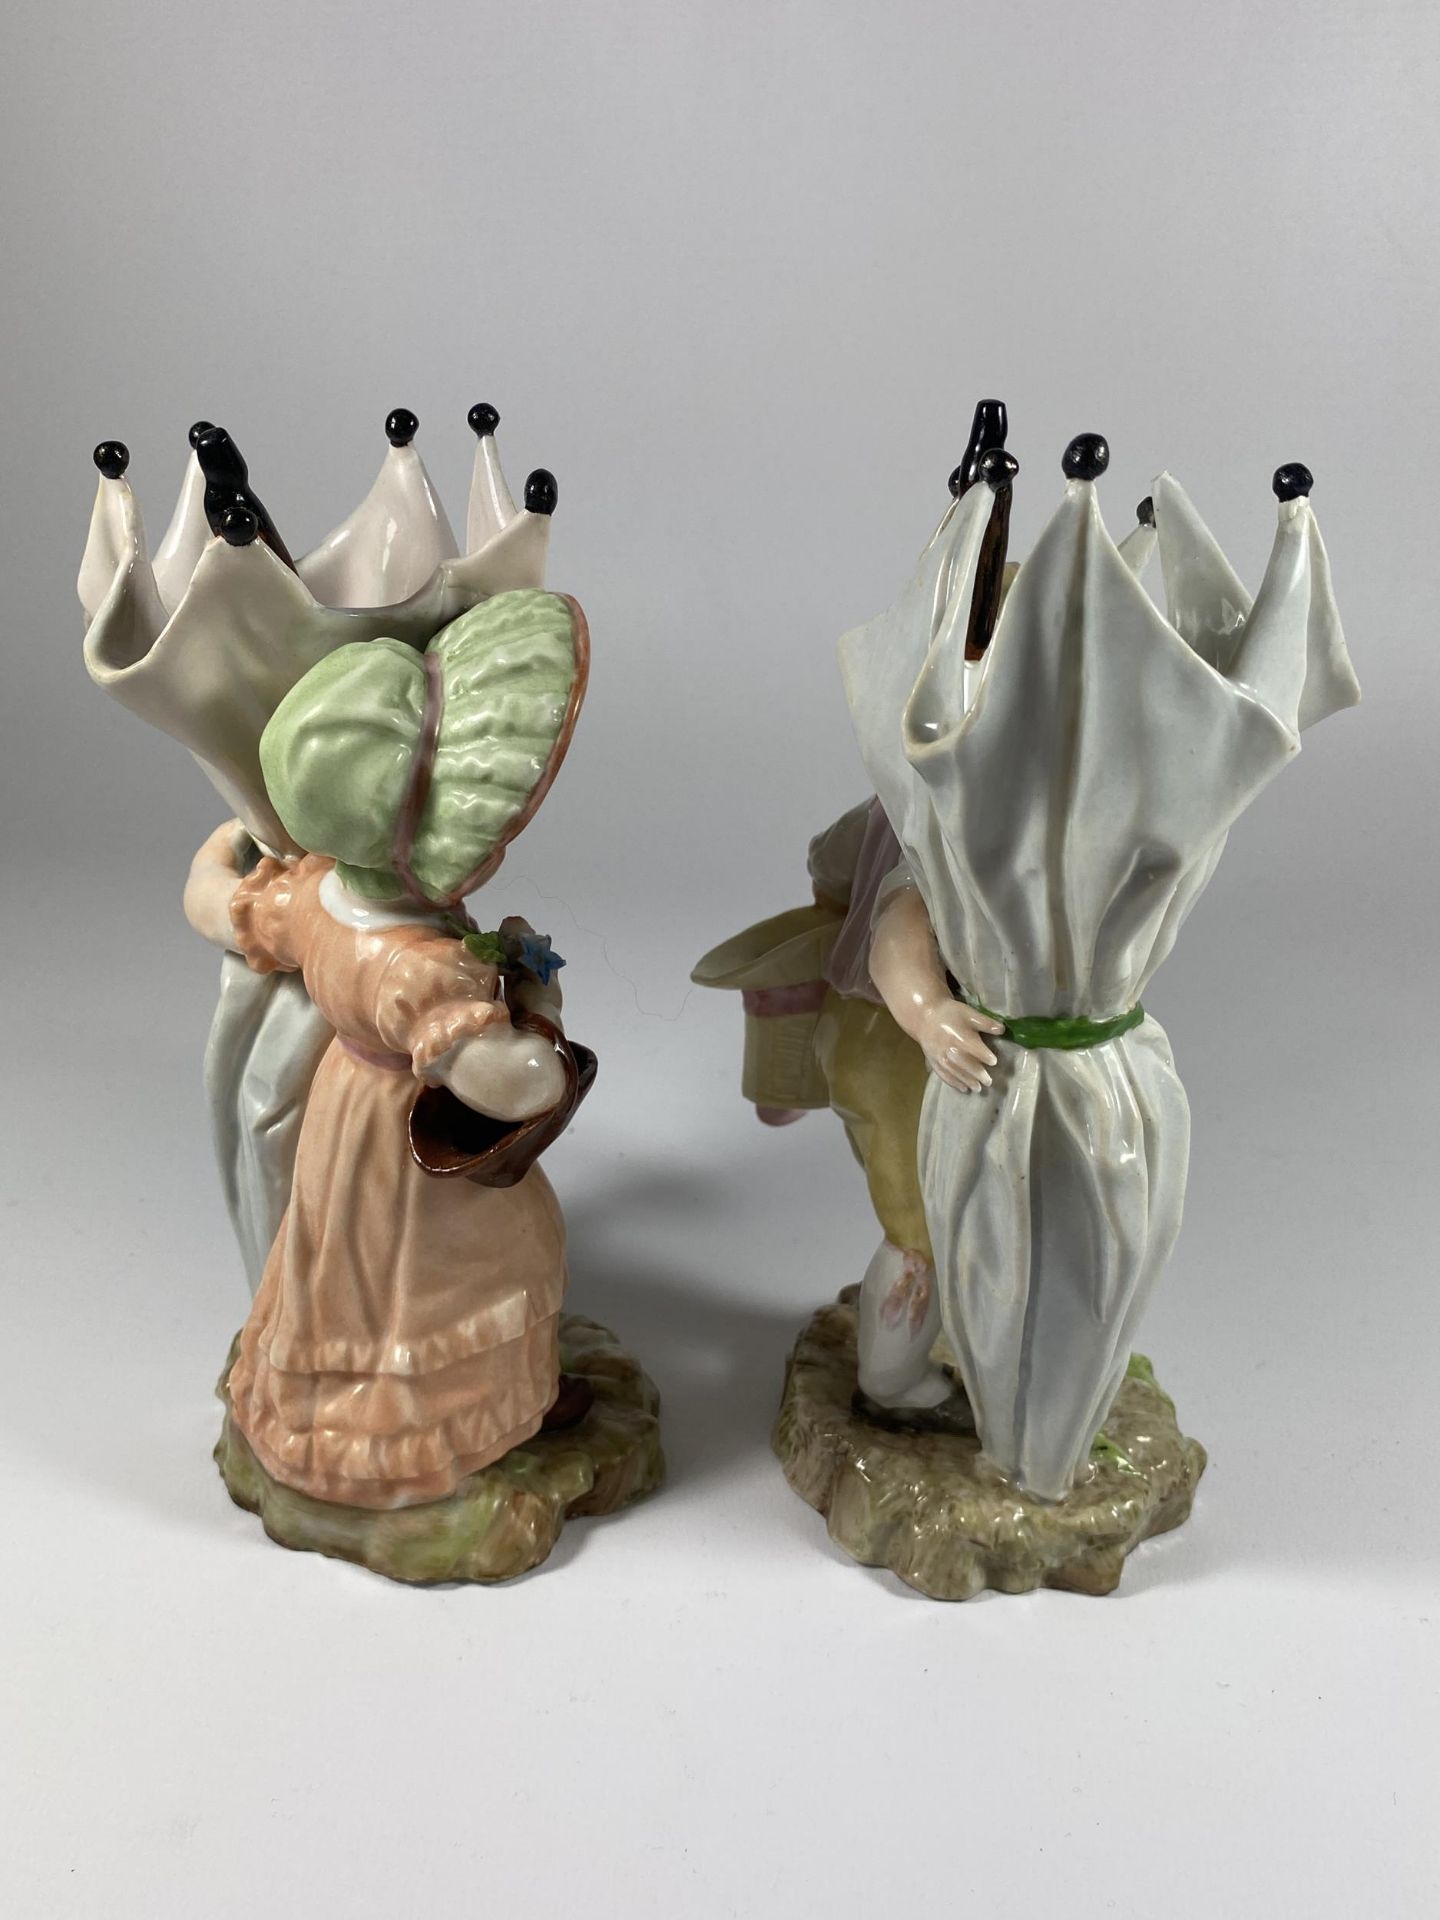 A PAIR OF 19TH CENTURY DRESDEN STYLE CONTINENTAL HARD PASTE PORCELAIN FIGURES WITH CROSSED SWORD - Image 2 of 4